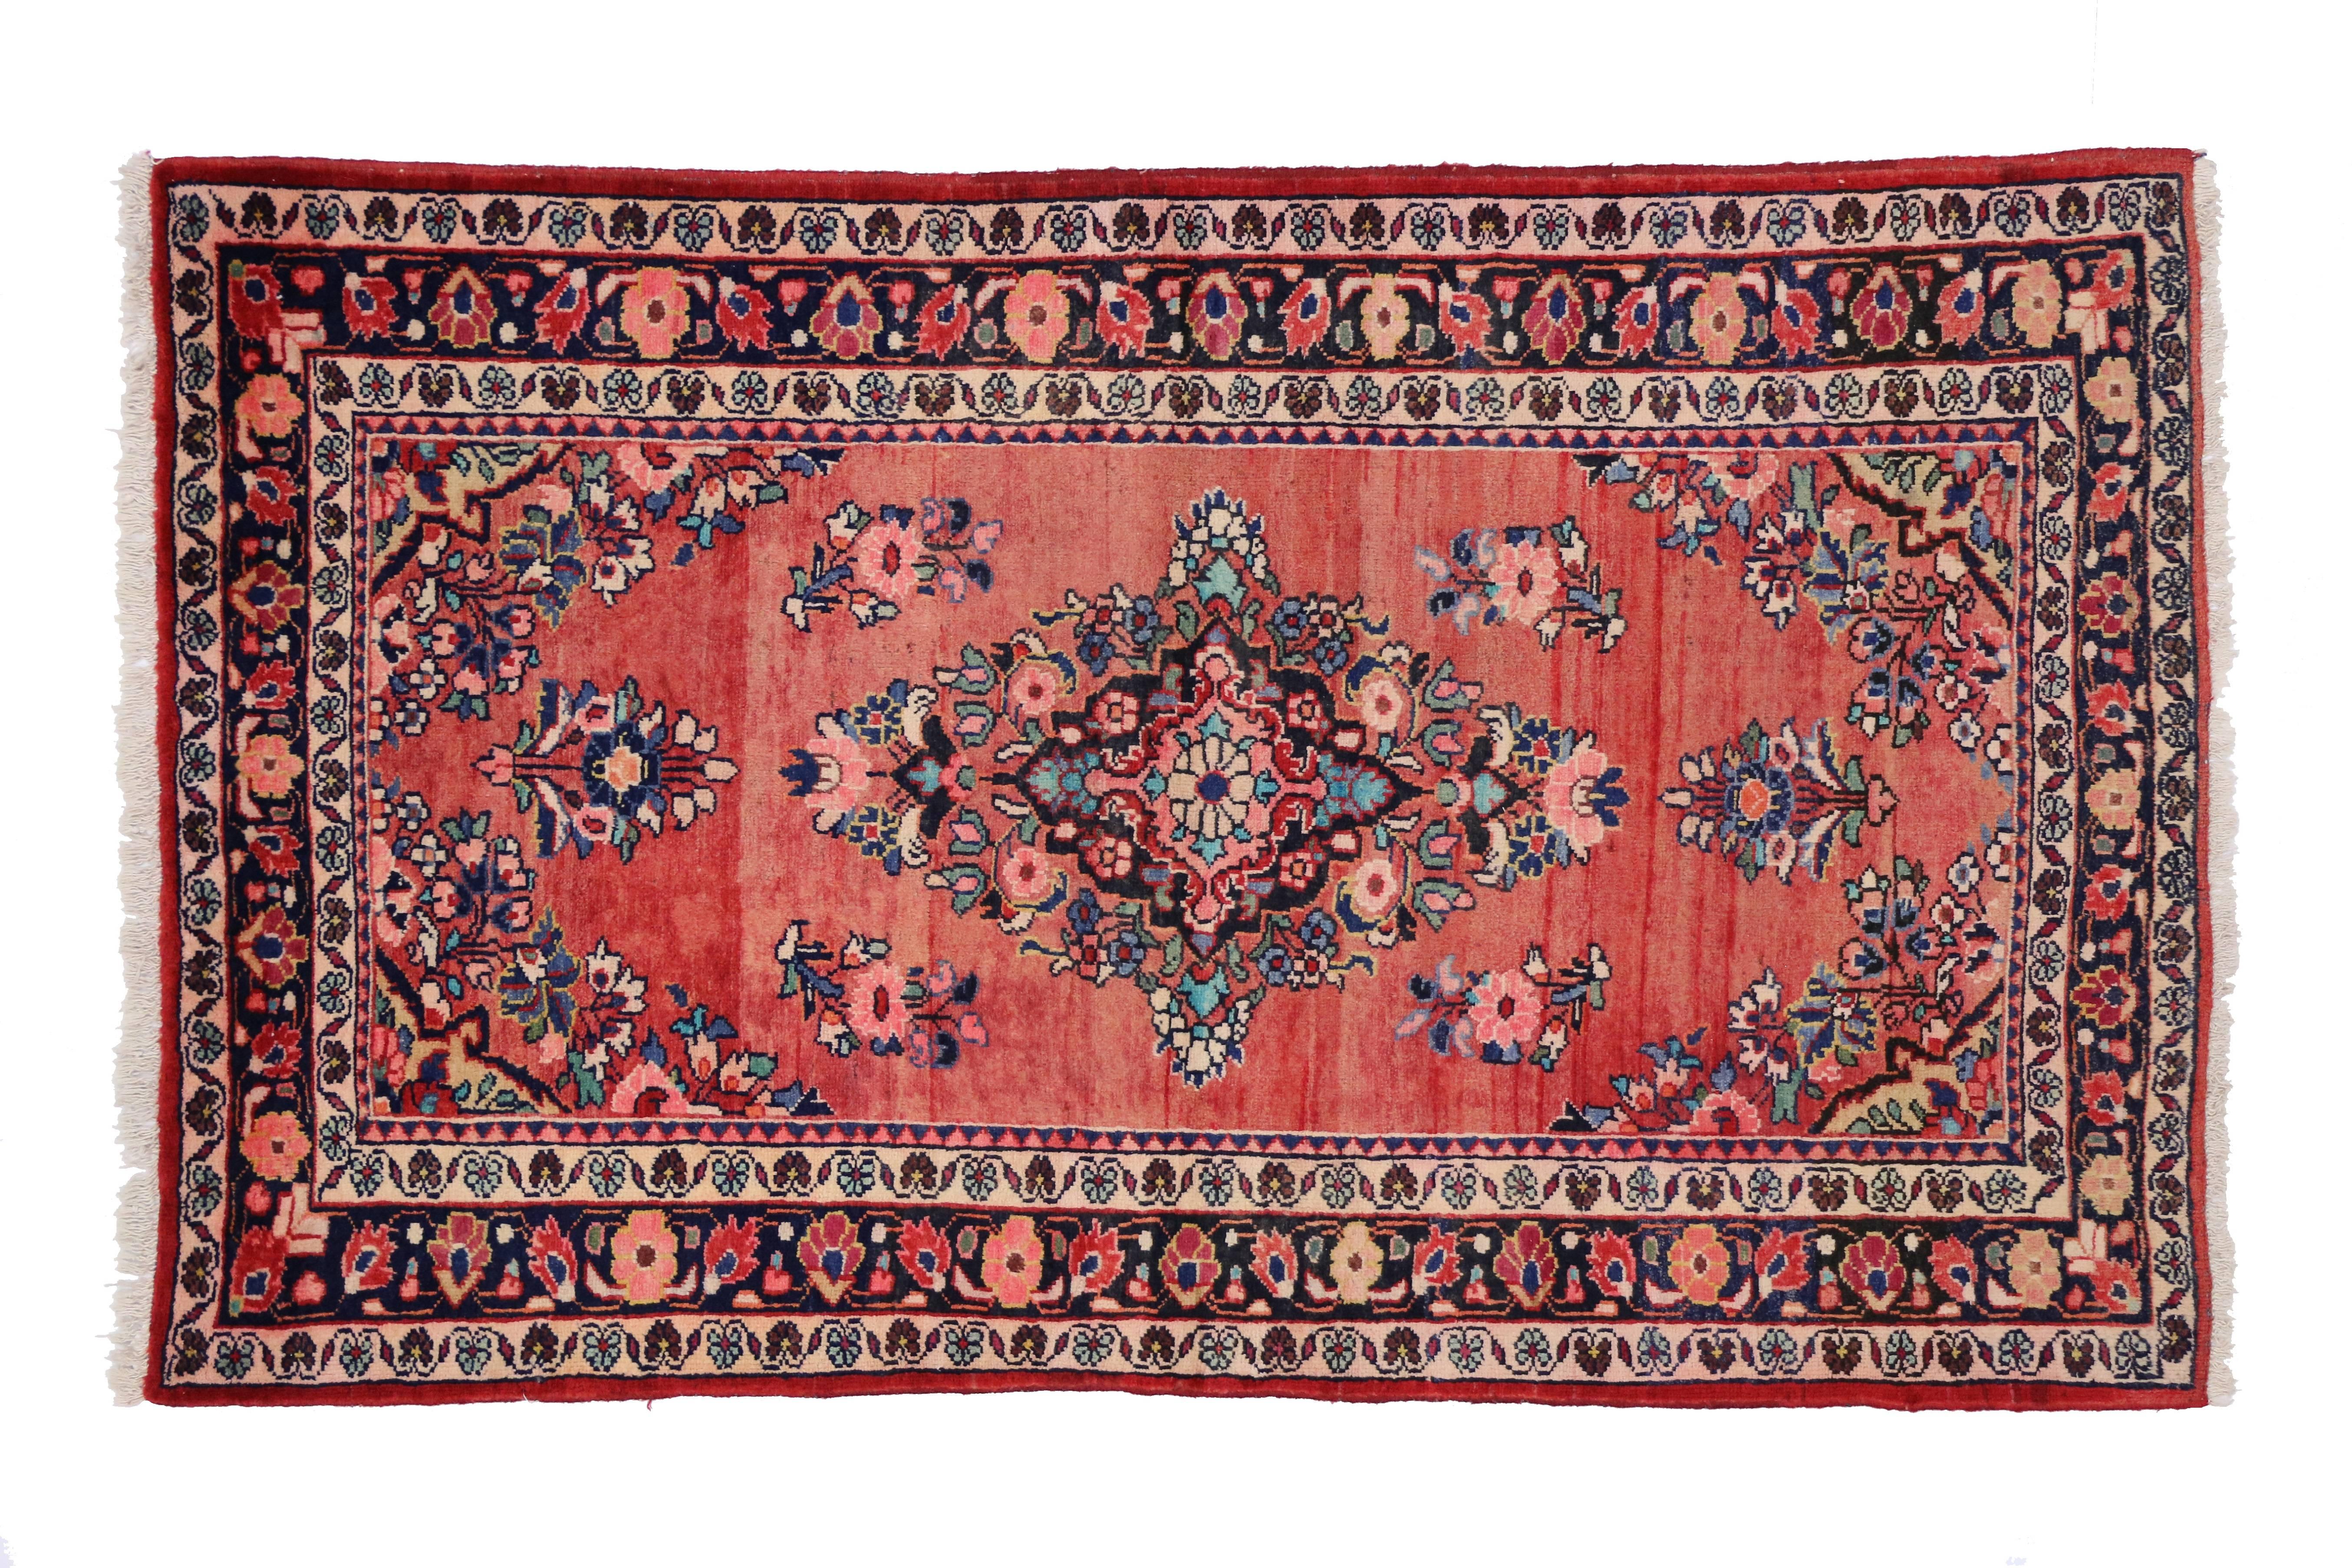 75192 vintage Persian Mahal rug with traditional style. This hand-knotted wool vintage Persian Mahal rug features a centre medallion in an abrashed field surrounded by floral bouquets enclosed by complementary spandrels and a classic border creating